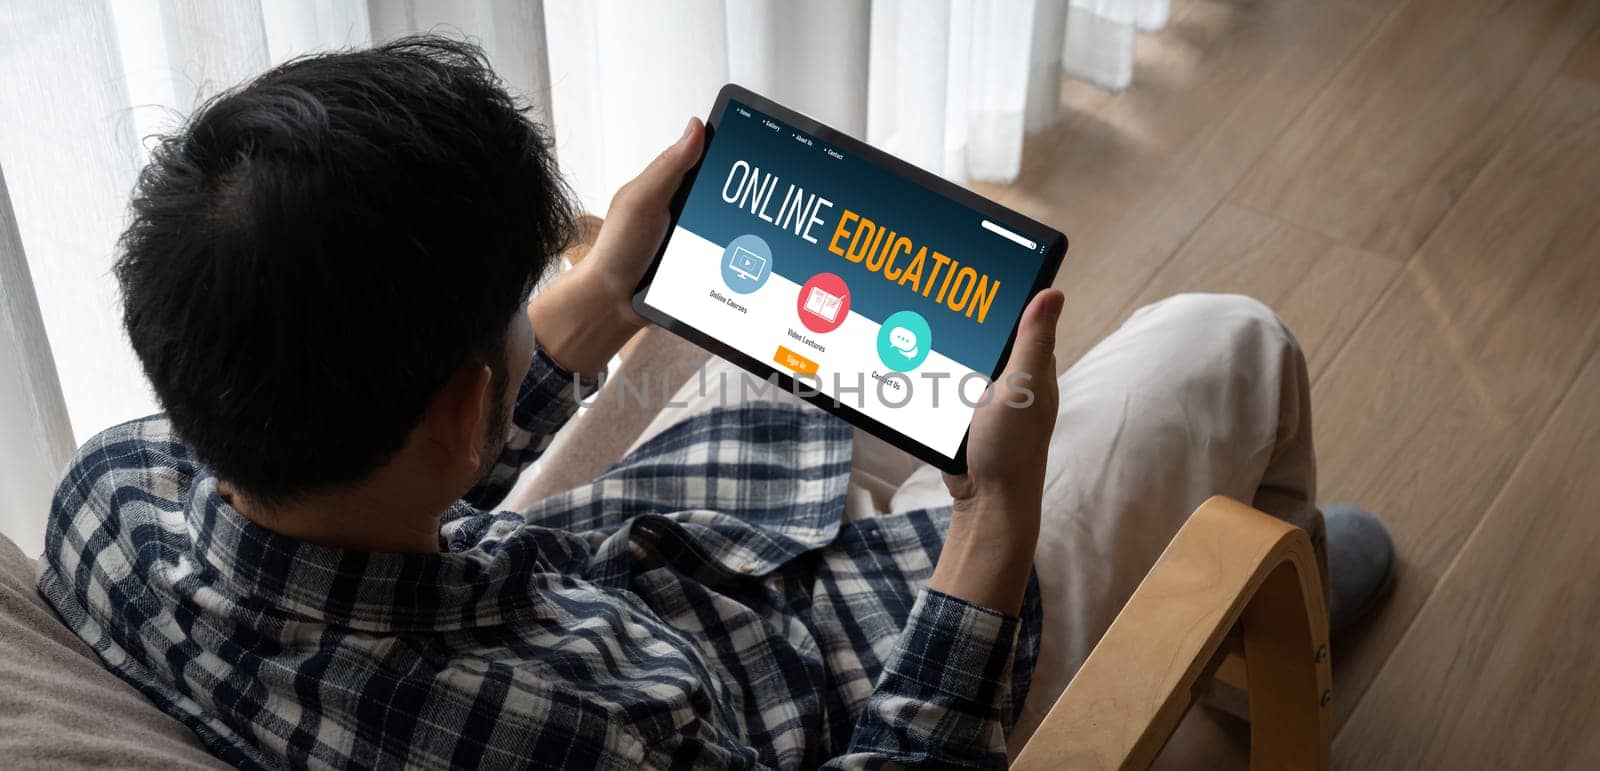 E-learning website with modish sofware for student to study on the internet by biancoblue